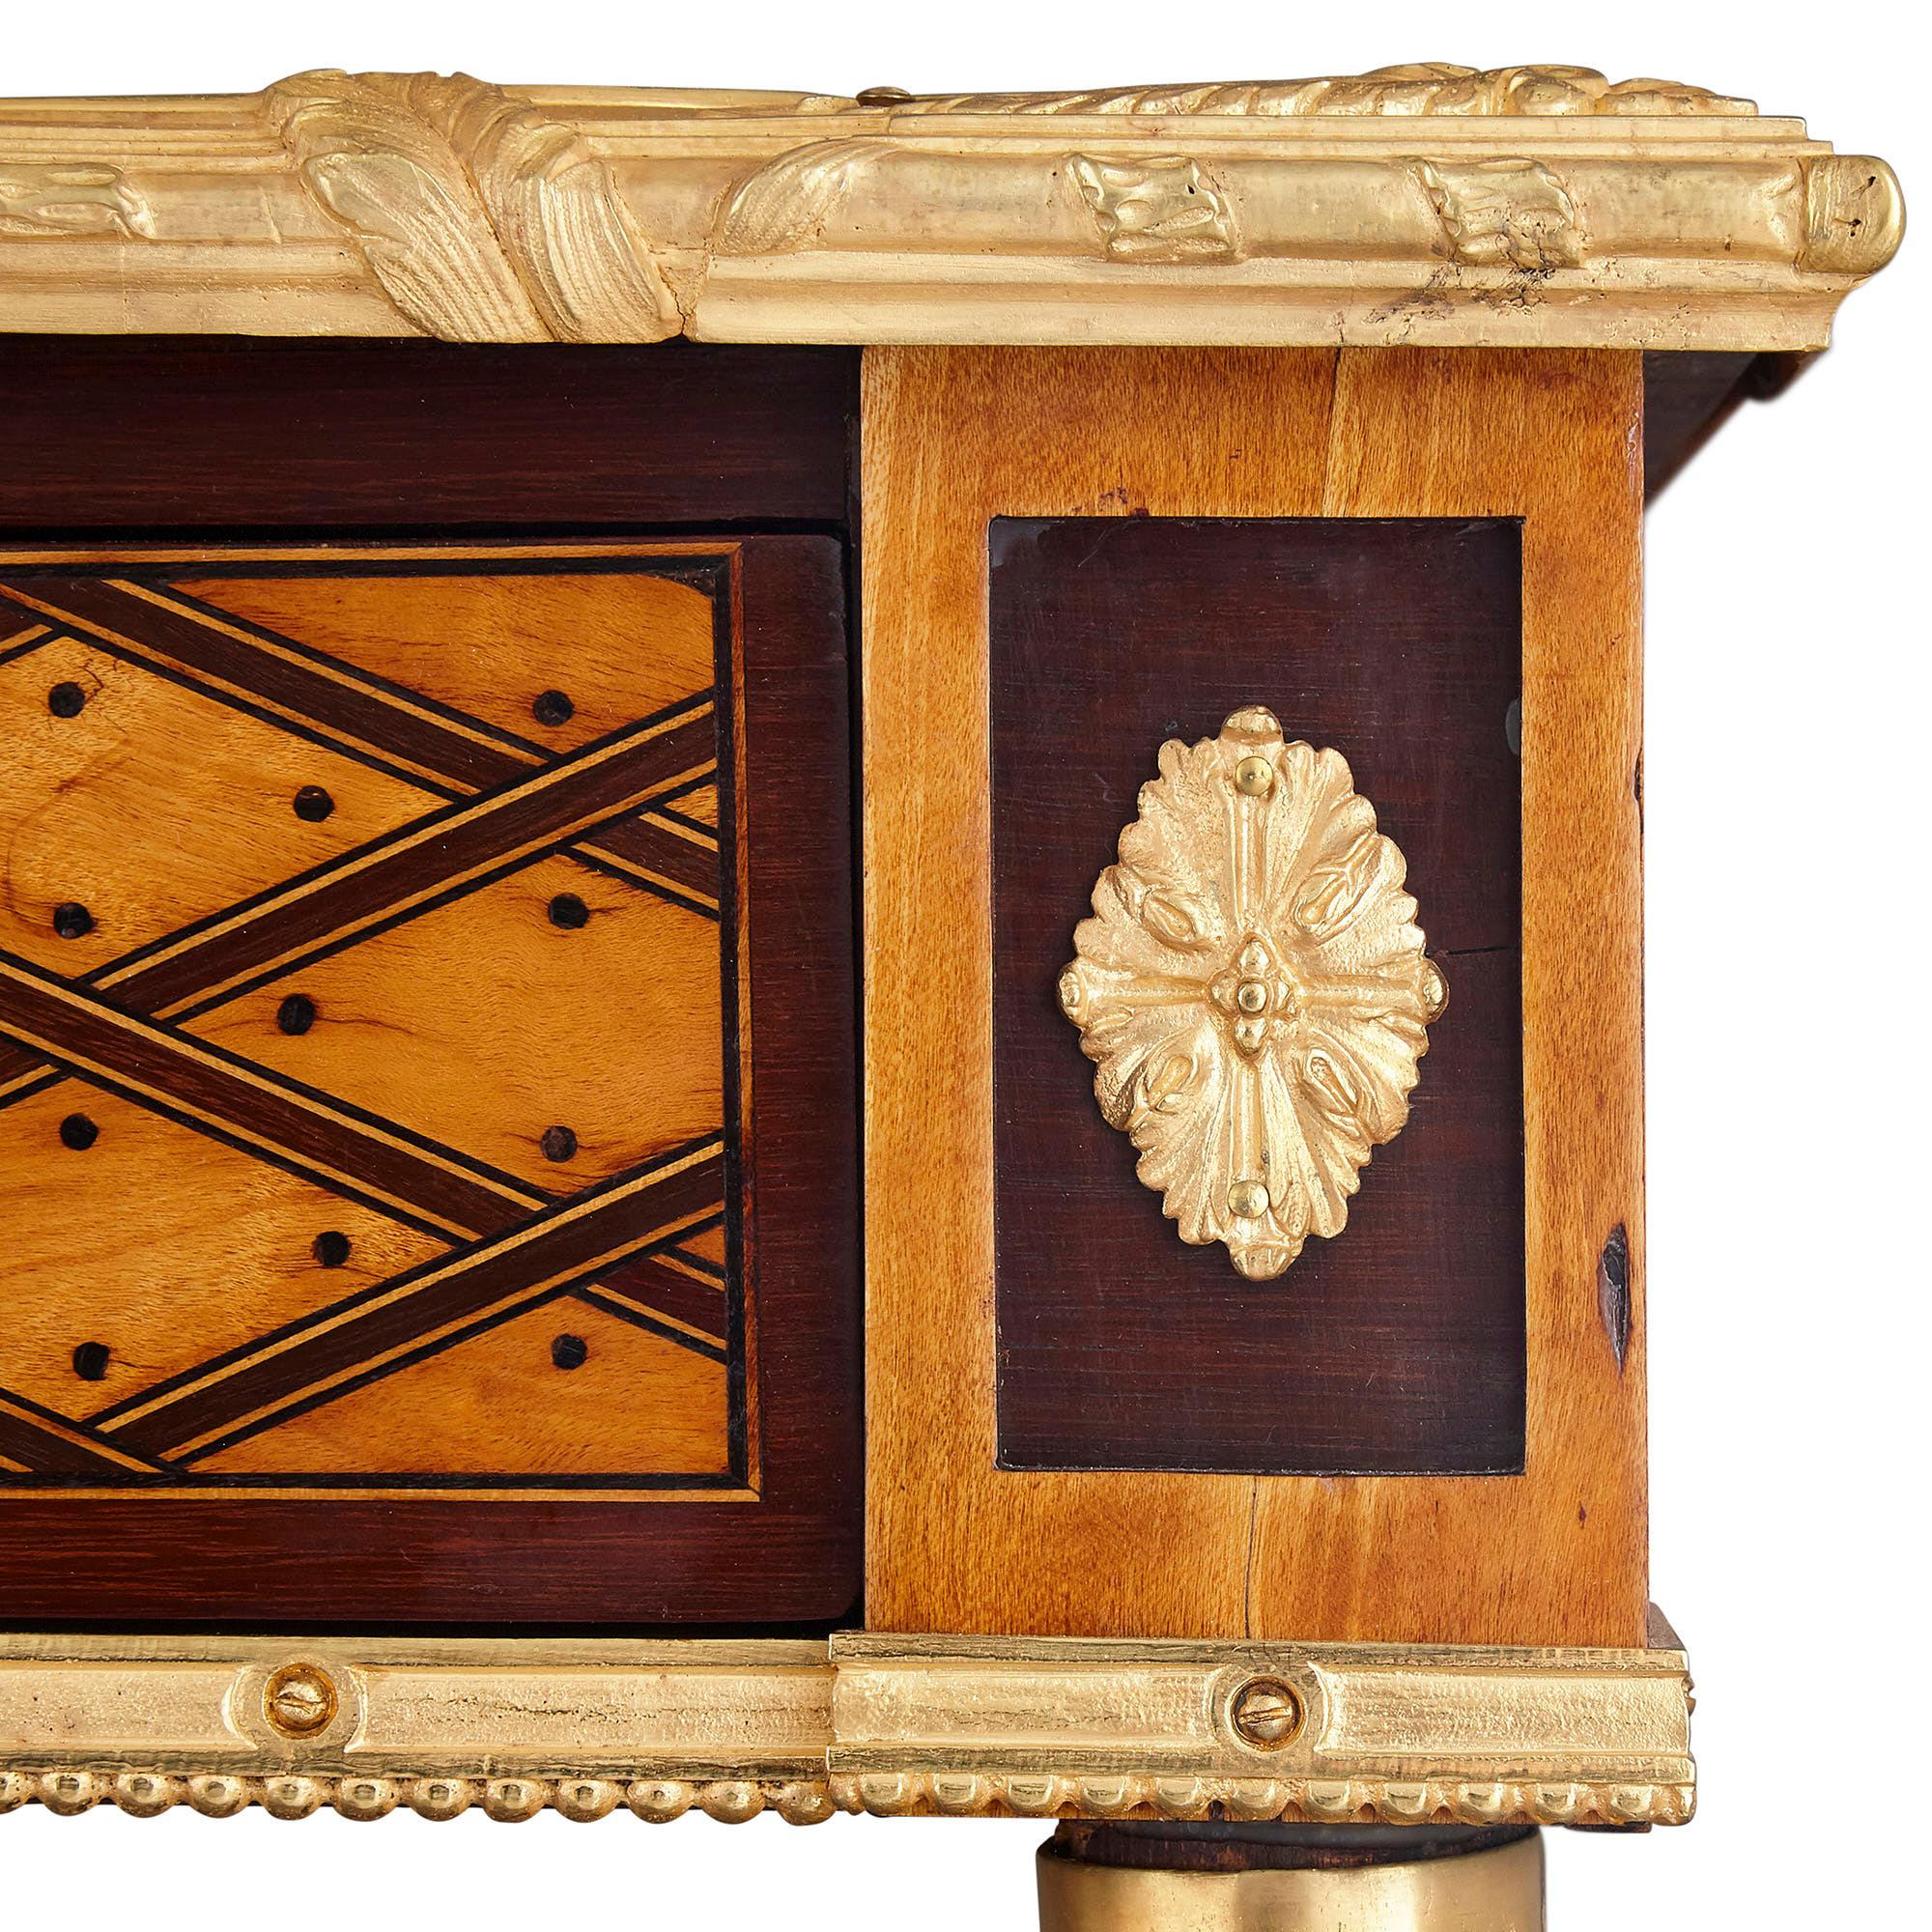 Late 19th Century Antique English Gilt Bronze and Marquetry Desk by Donald Ross For Sale